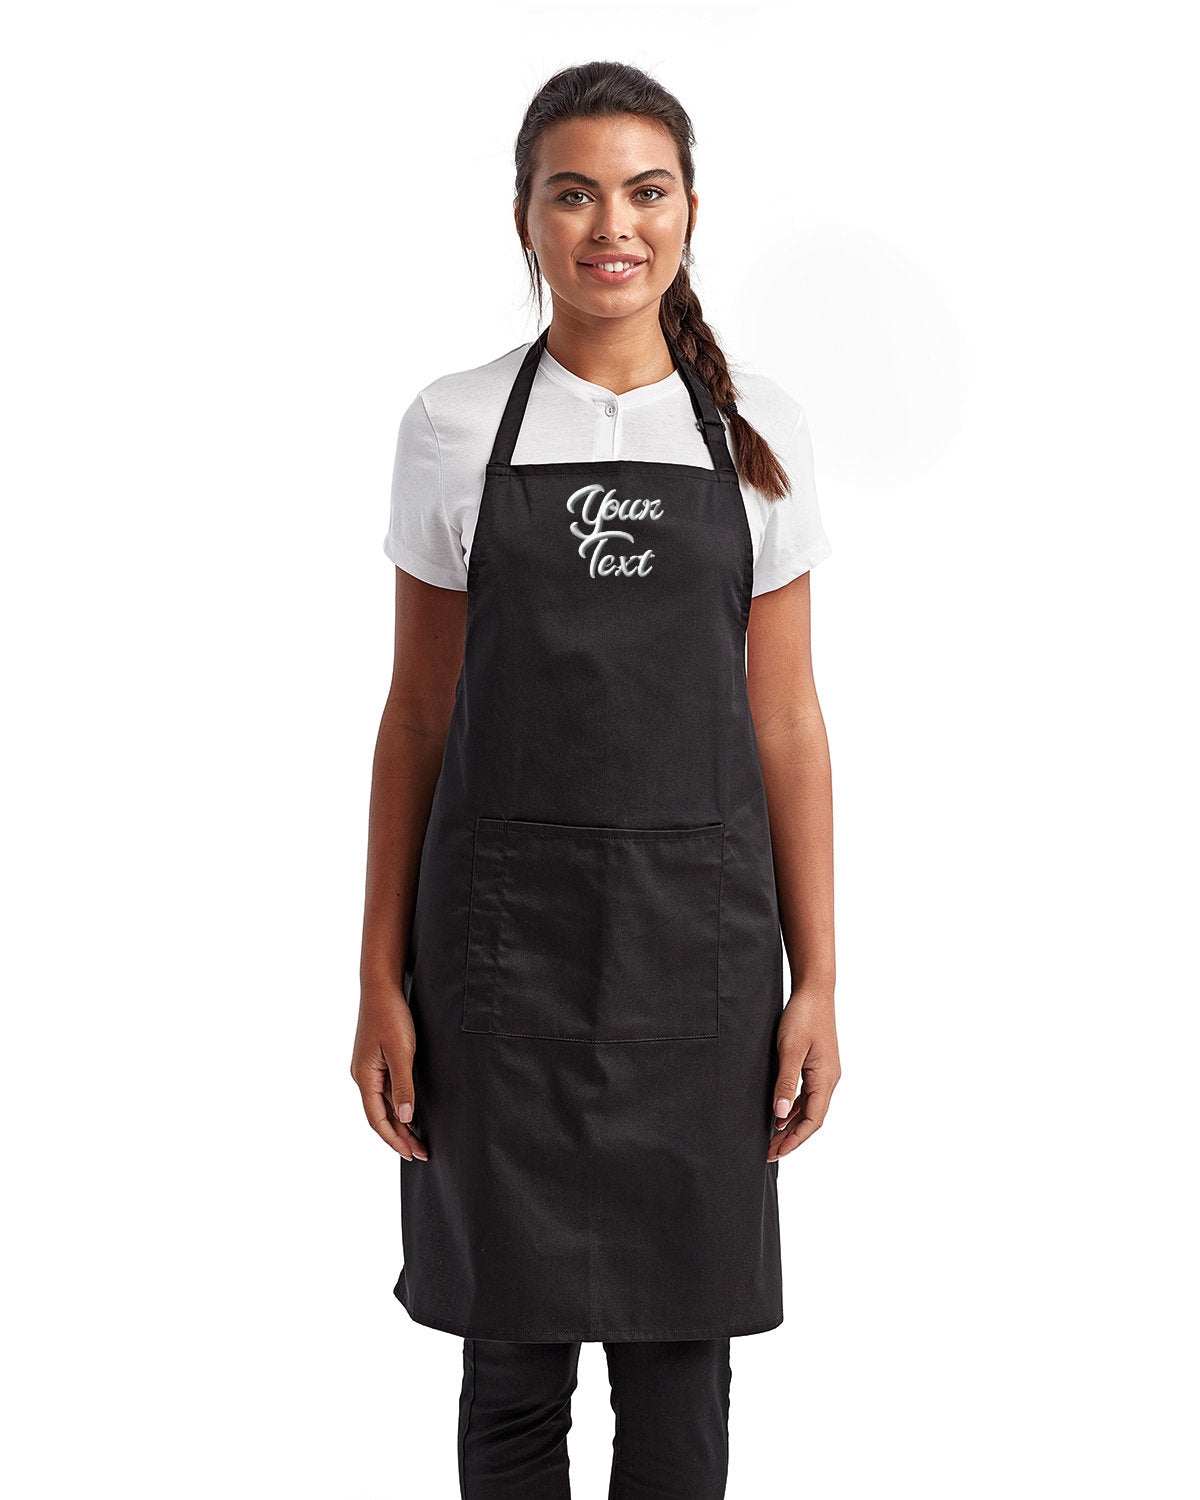 Restaurant Aprons with Your Company Name Embroidered - 3 Pack black denim